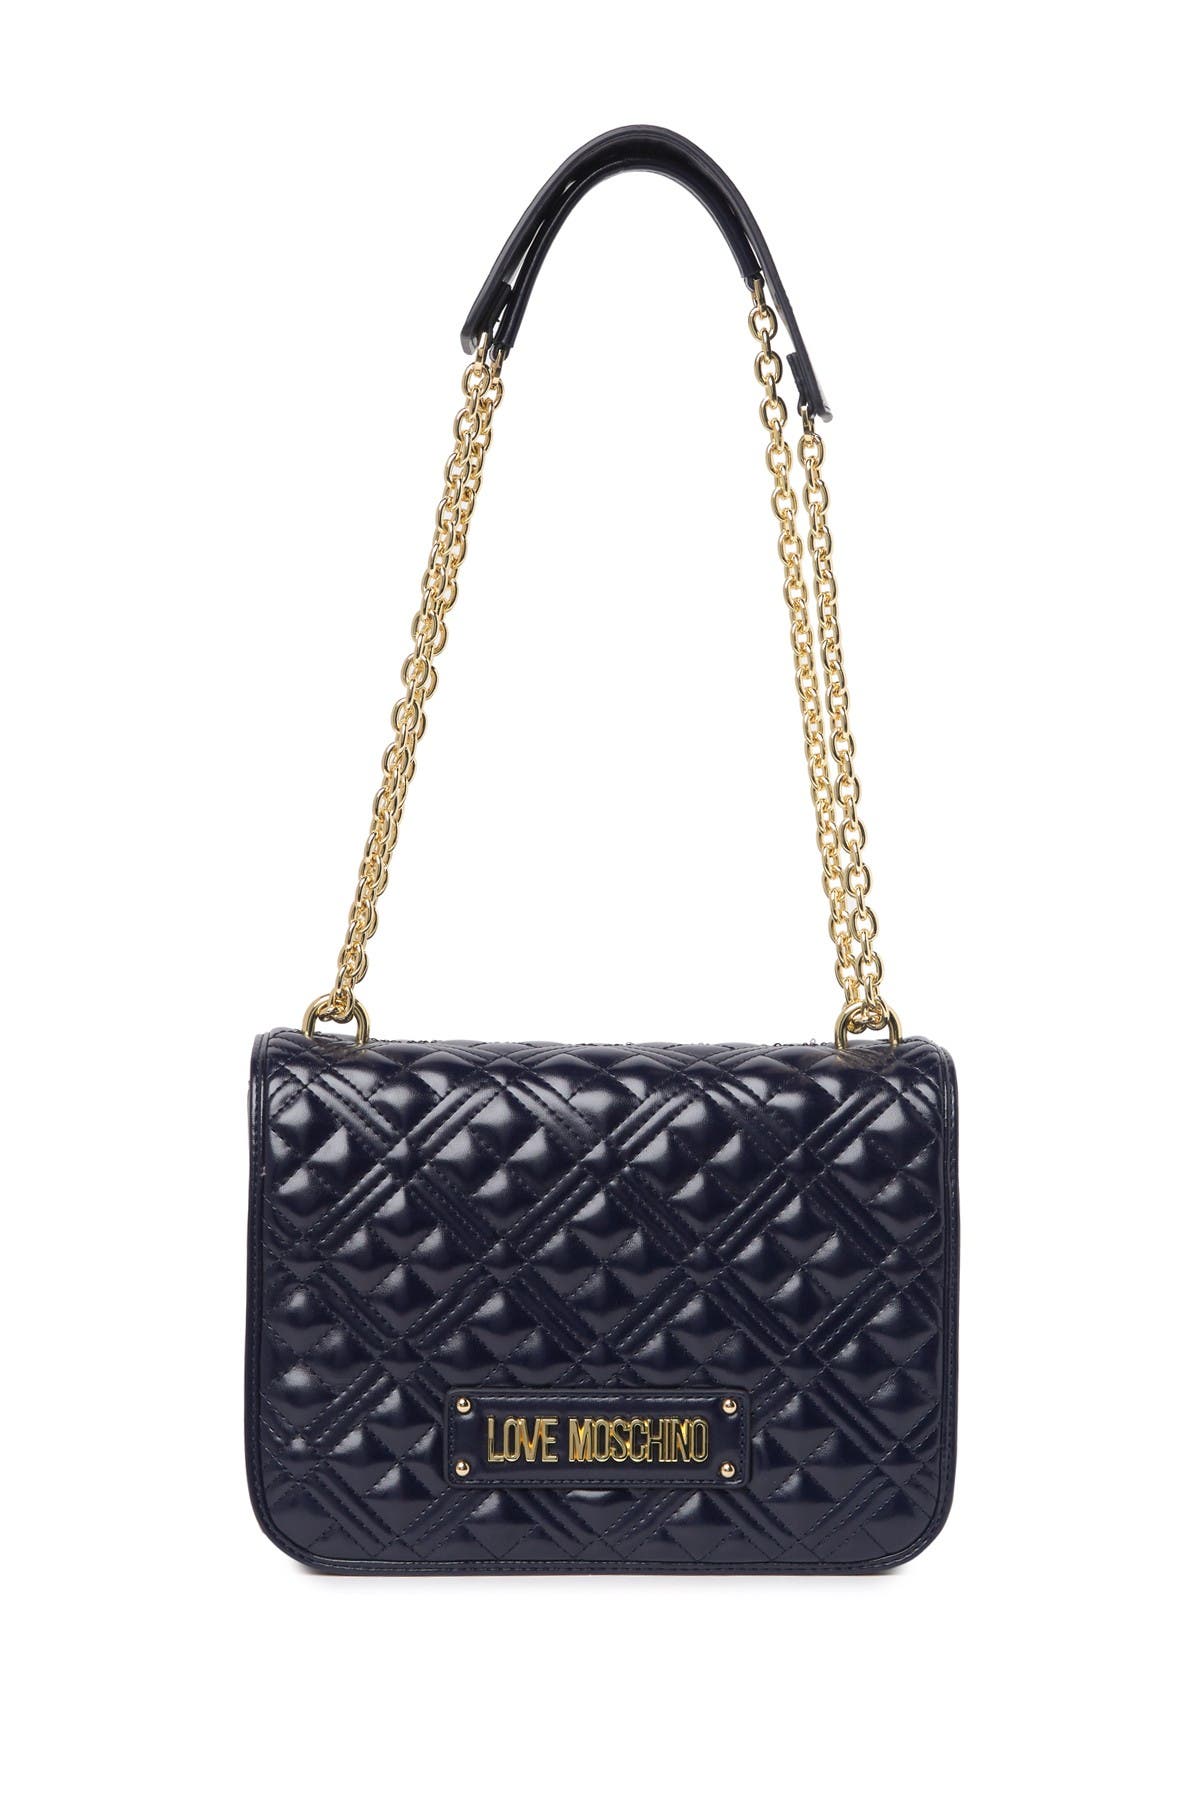 love moschino shoulder bags